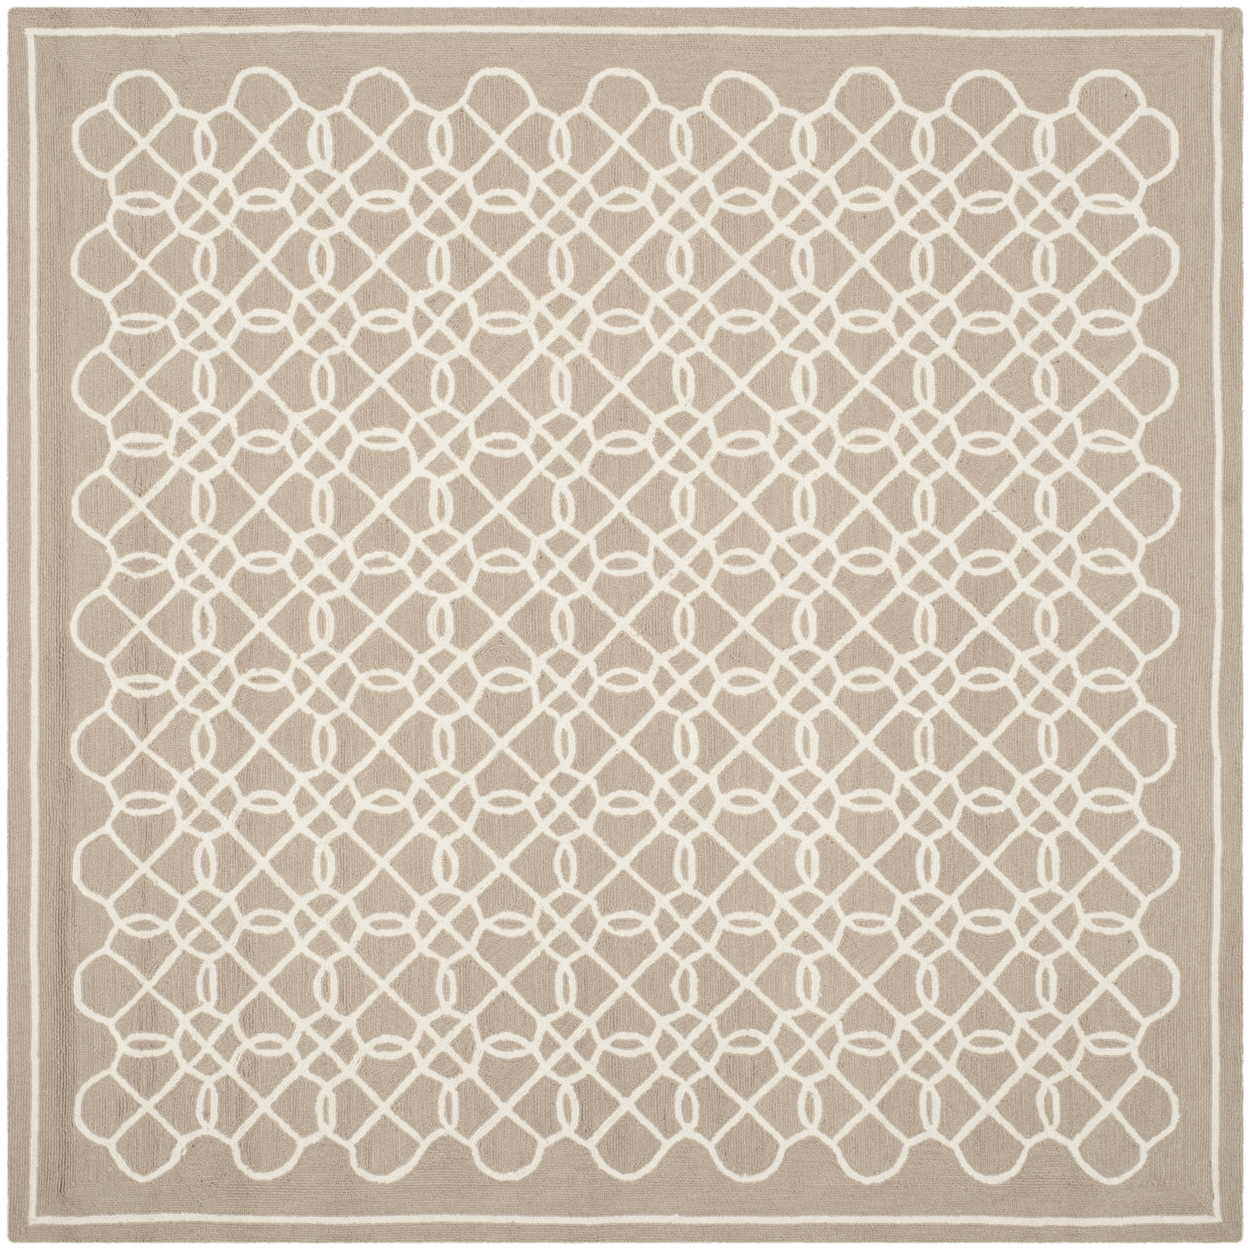 SAFAVIEH Chelsea HK739A Hand-hooked Tan / Ivory Rug - 8' Square